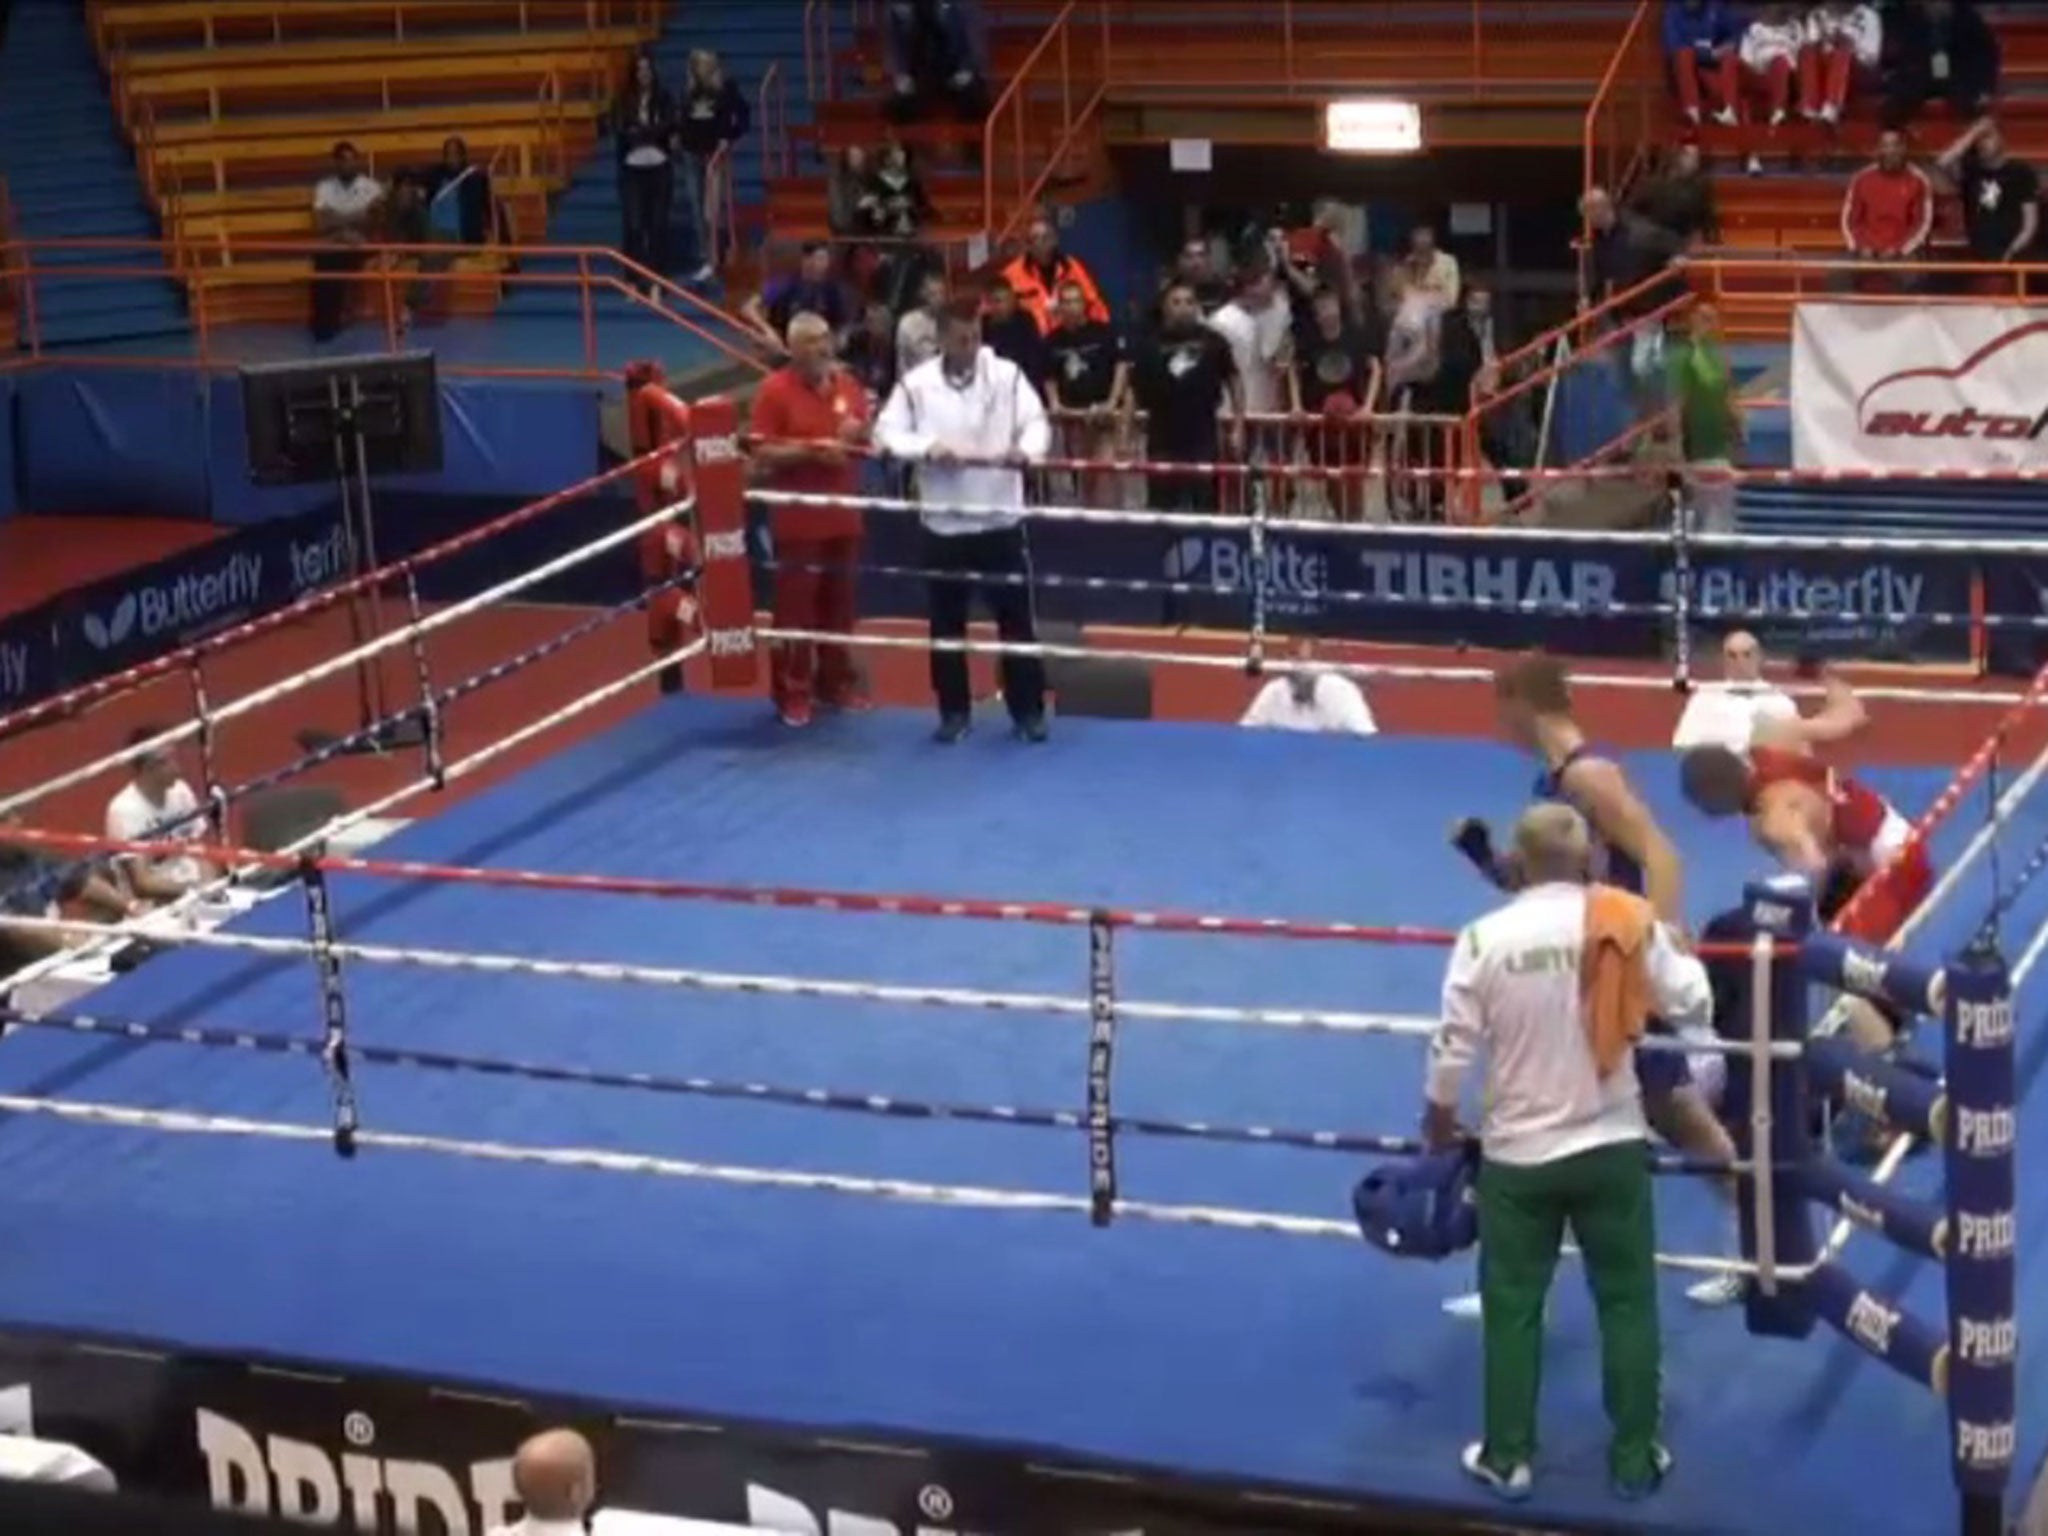 A boxer brutally assaults a referee after a European Youth Boxing Championship bout